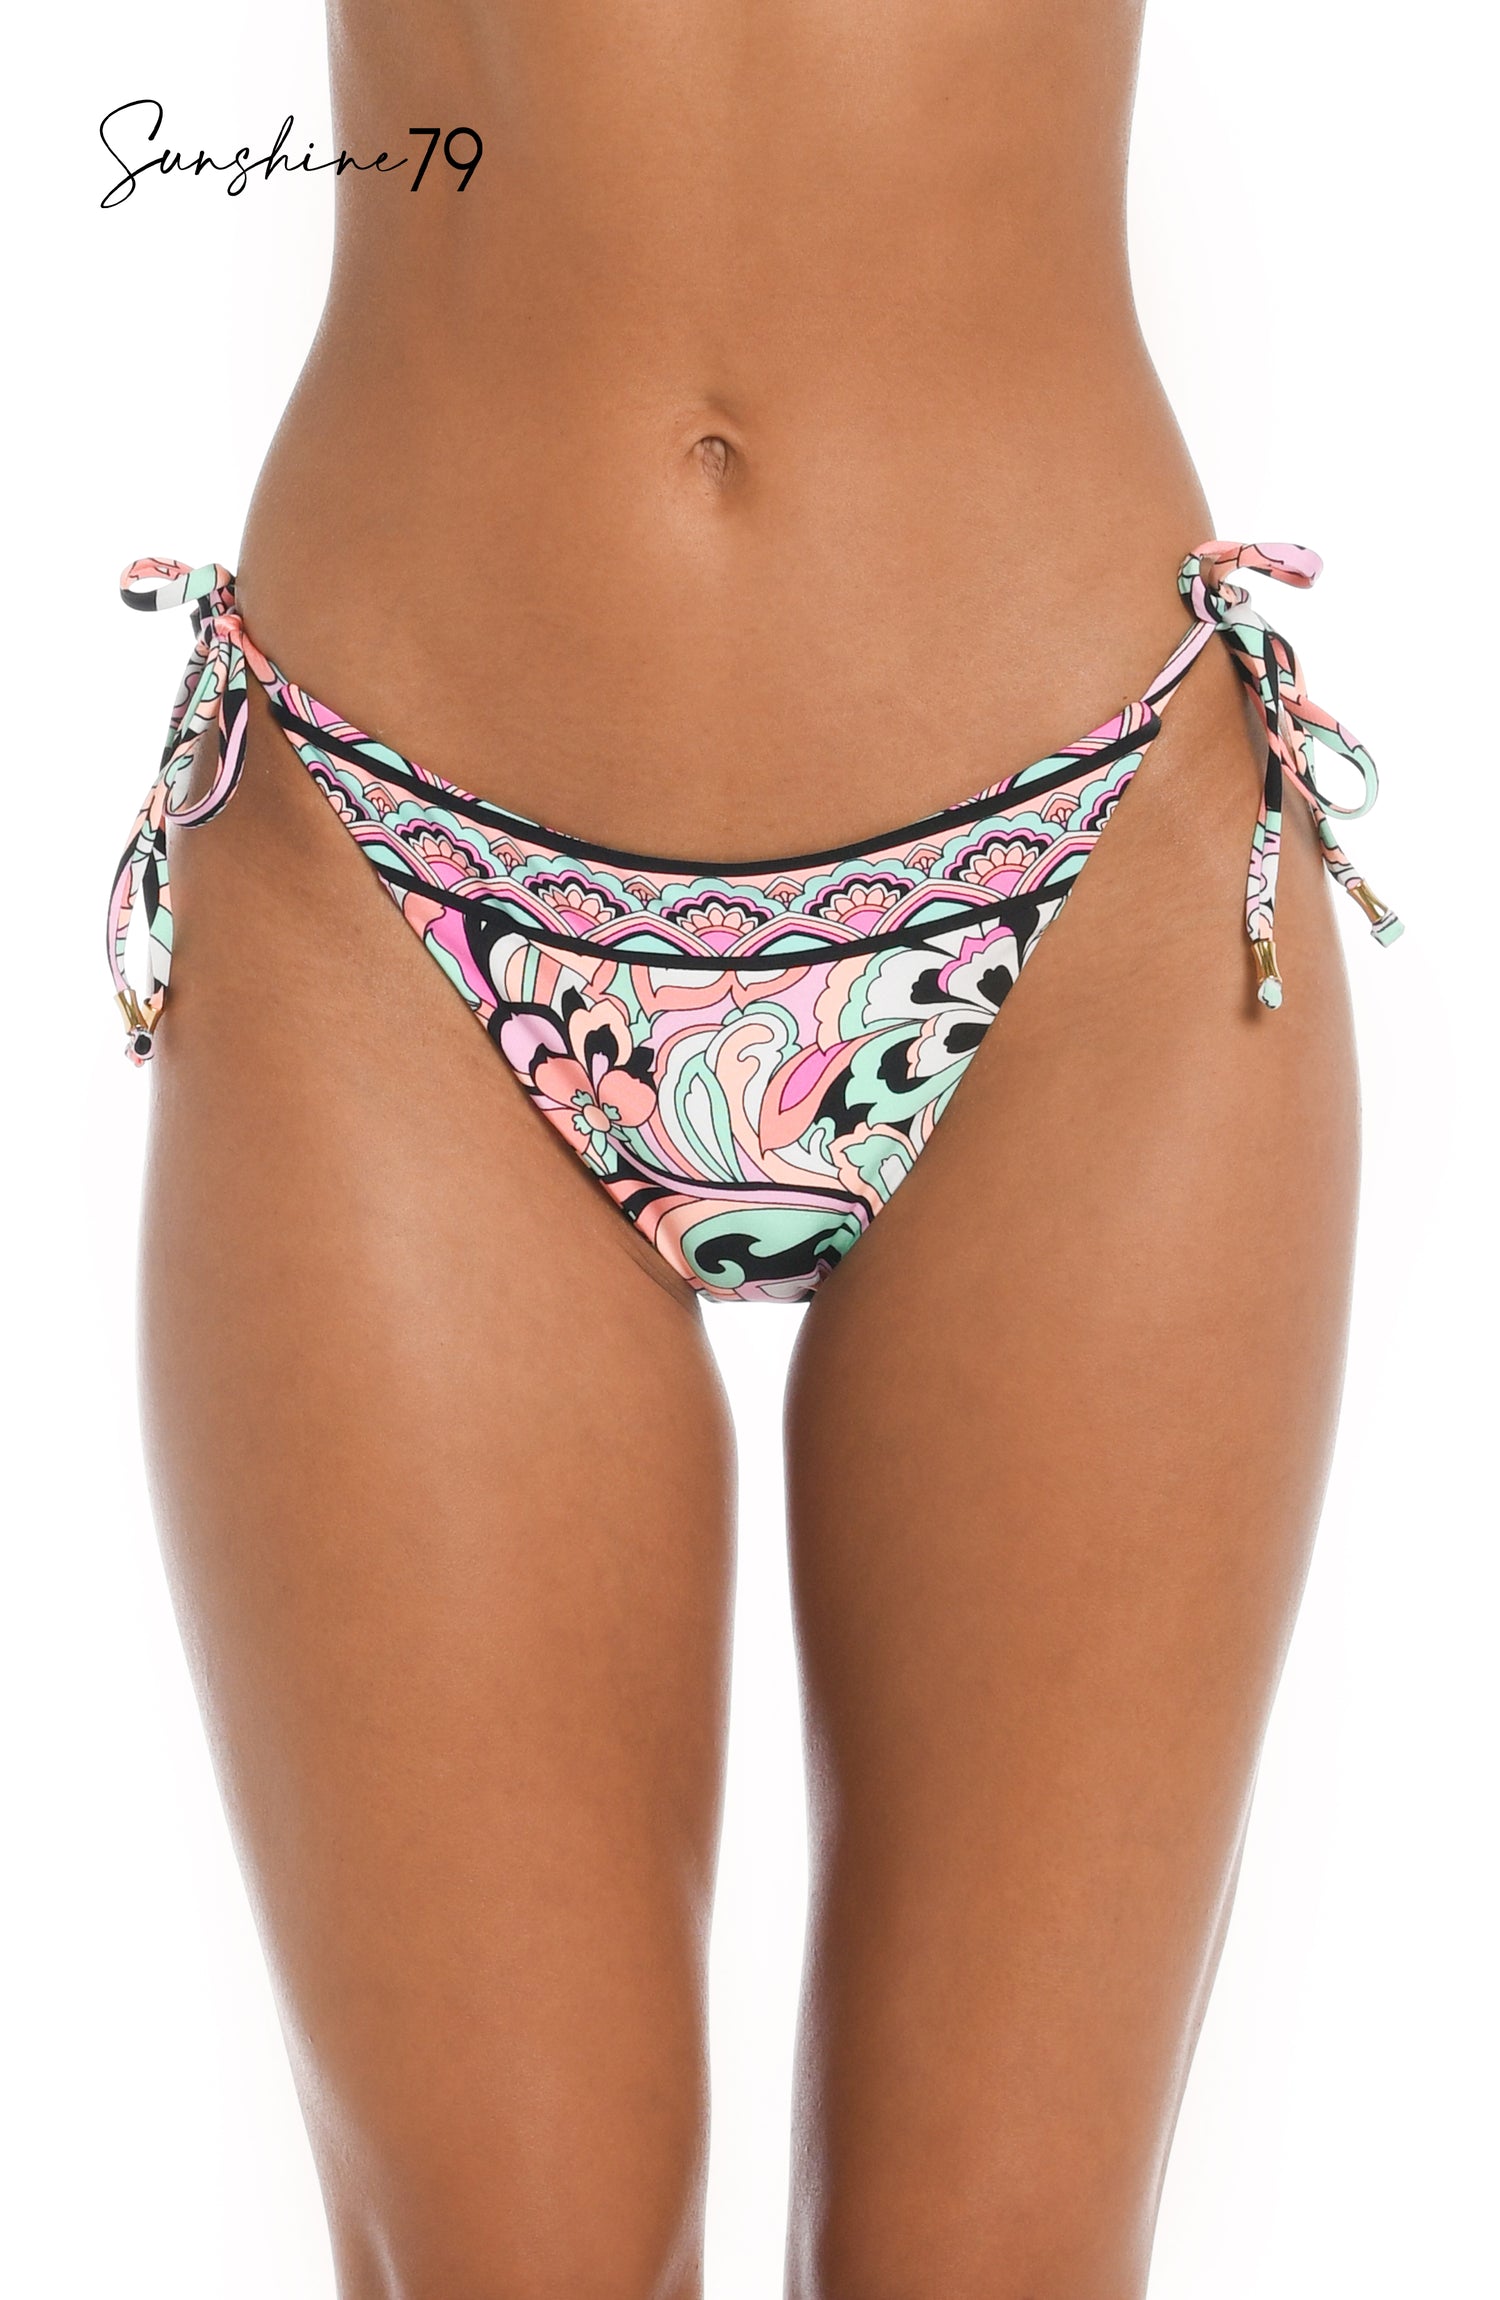 Model is wearing a pink multicolored paisley printed string tie side hipster bikini bottom from our Sunshine 79 brand.